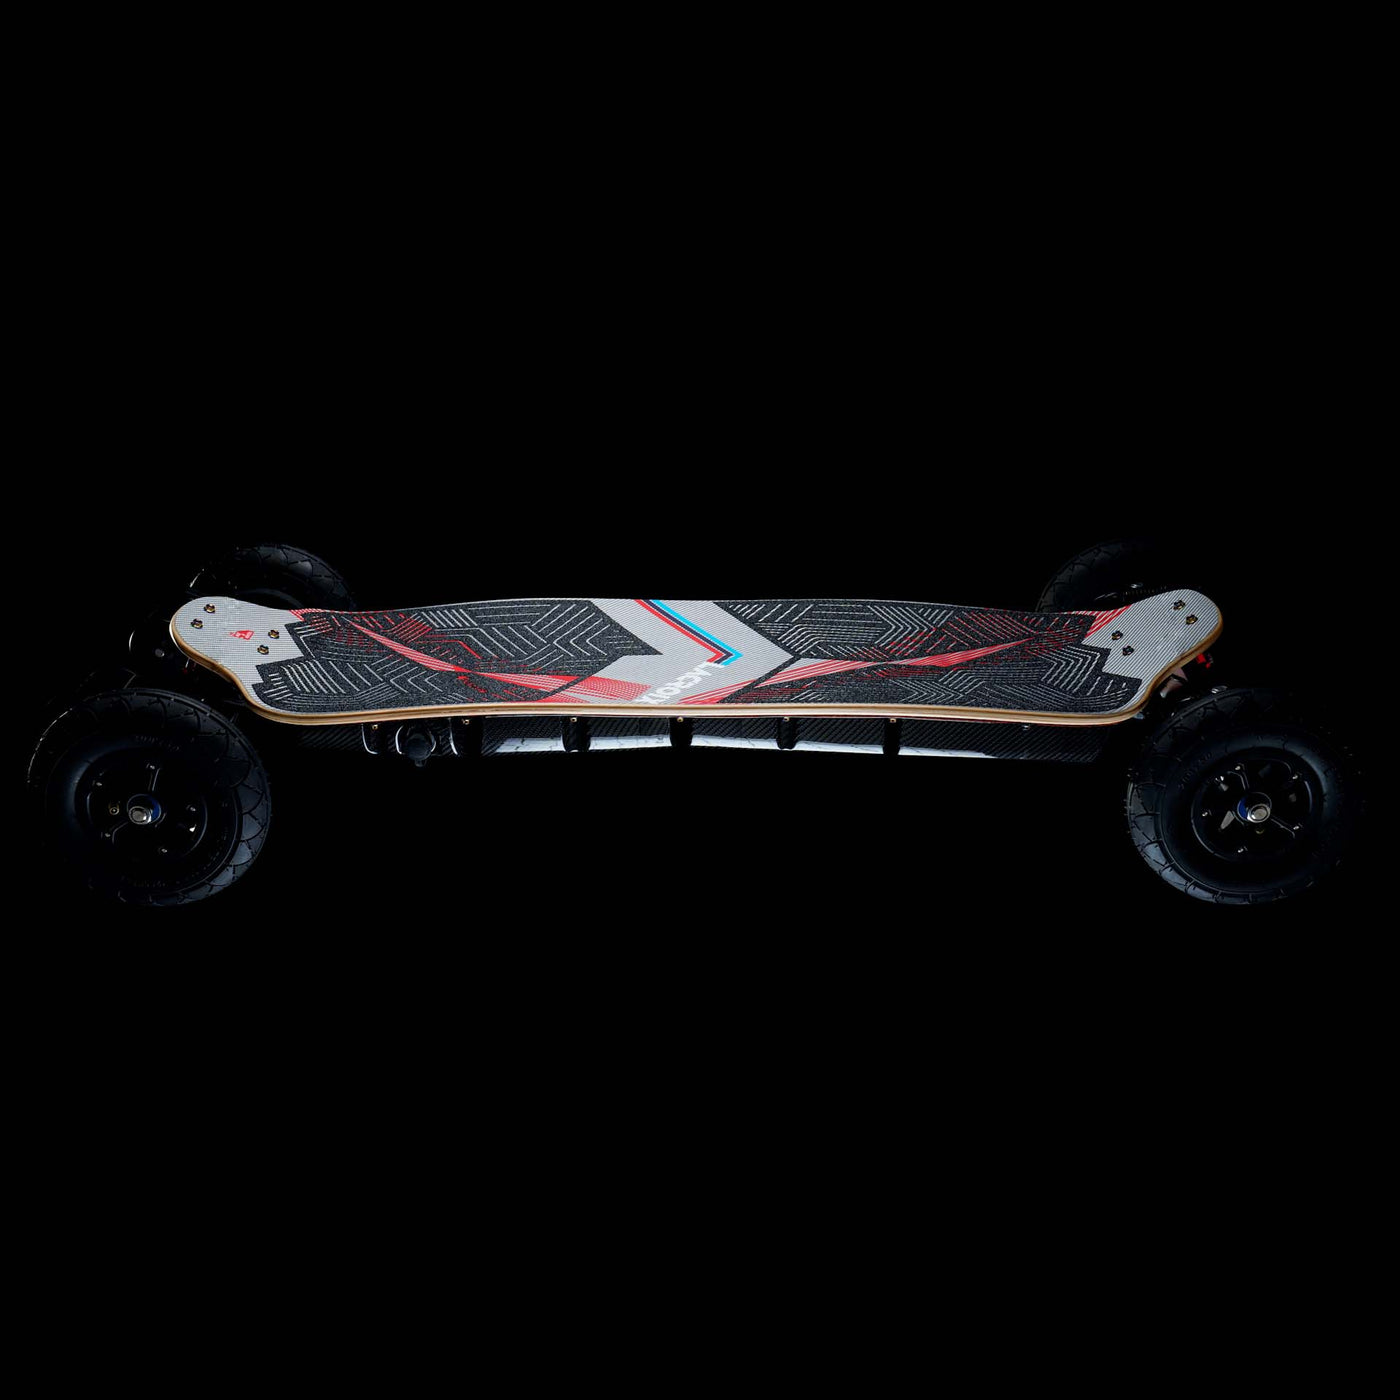 Lacroix Jaws 2.0™ Electric skateboard